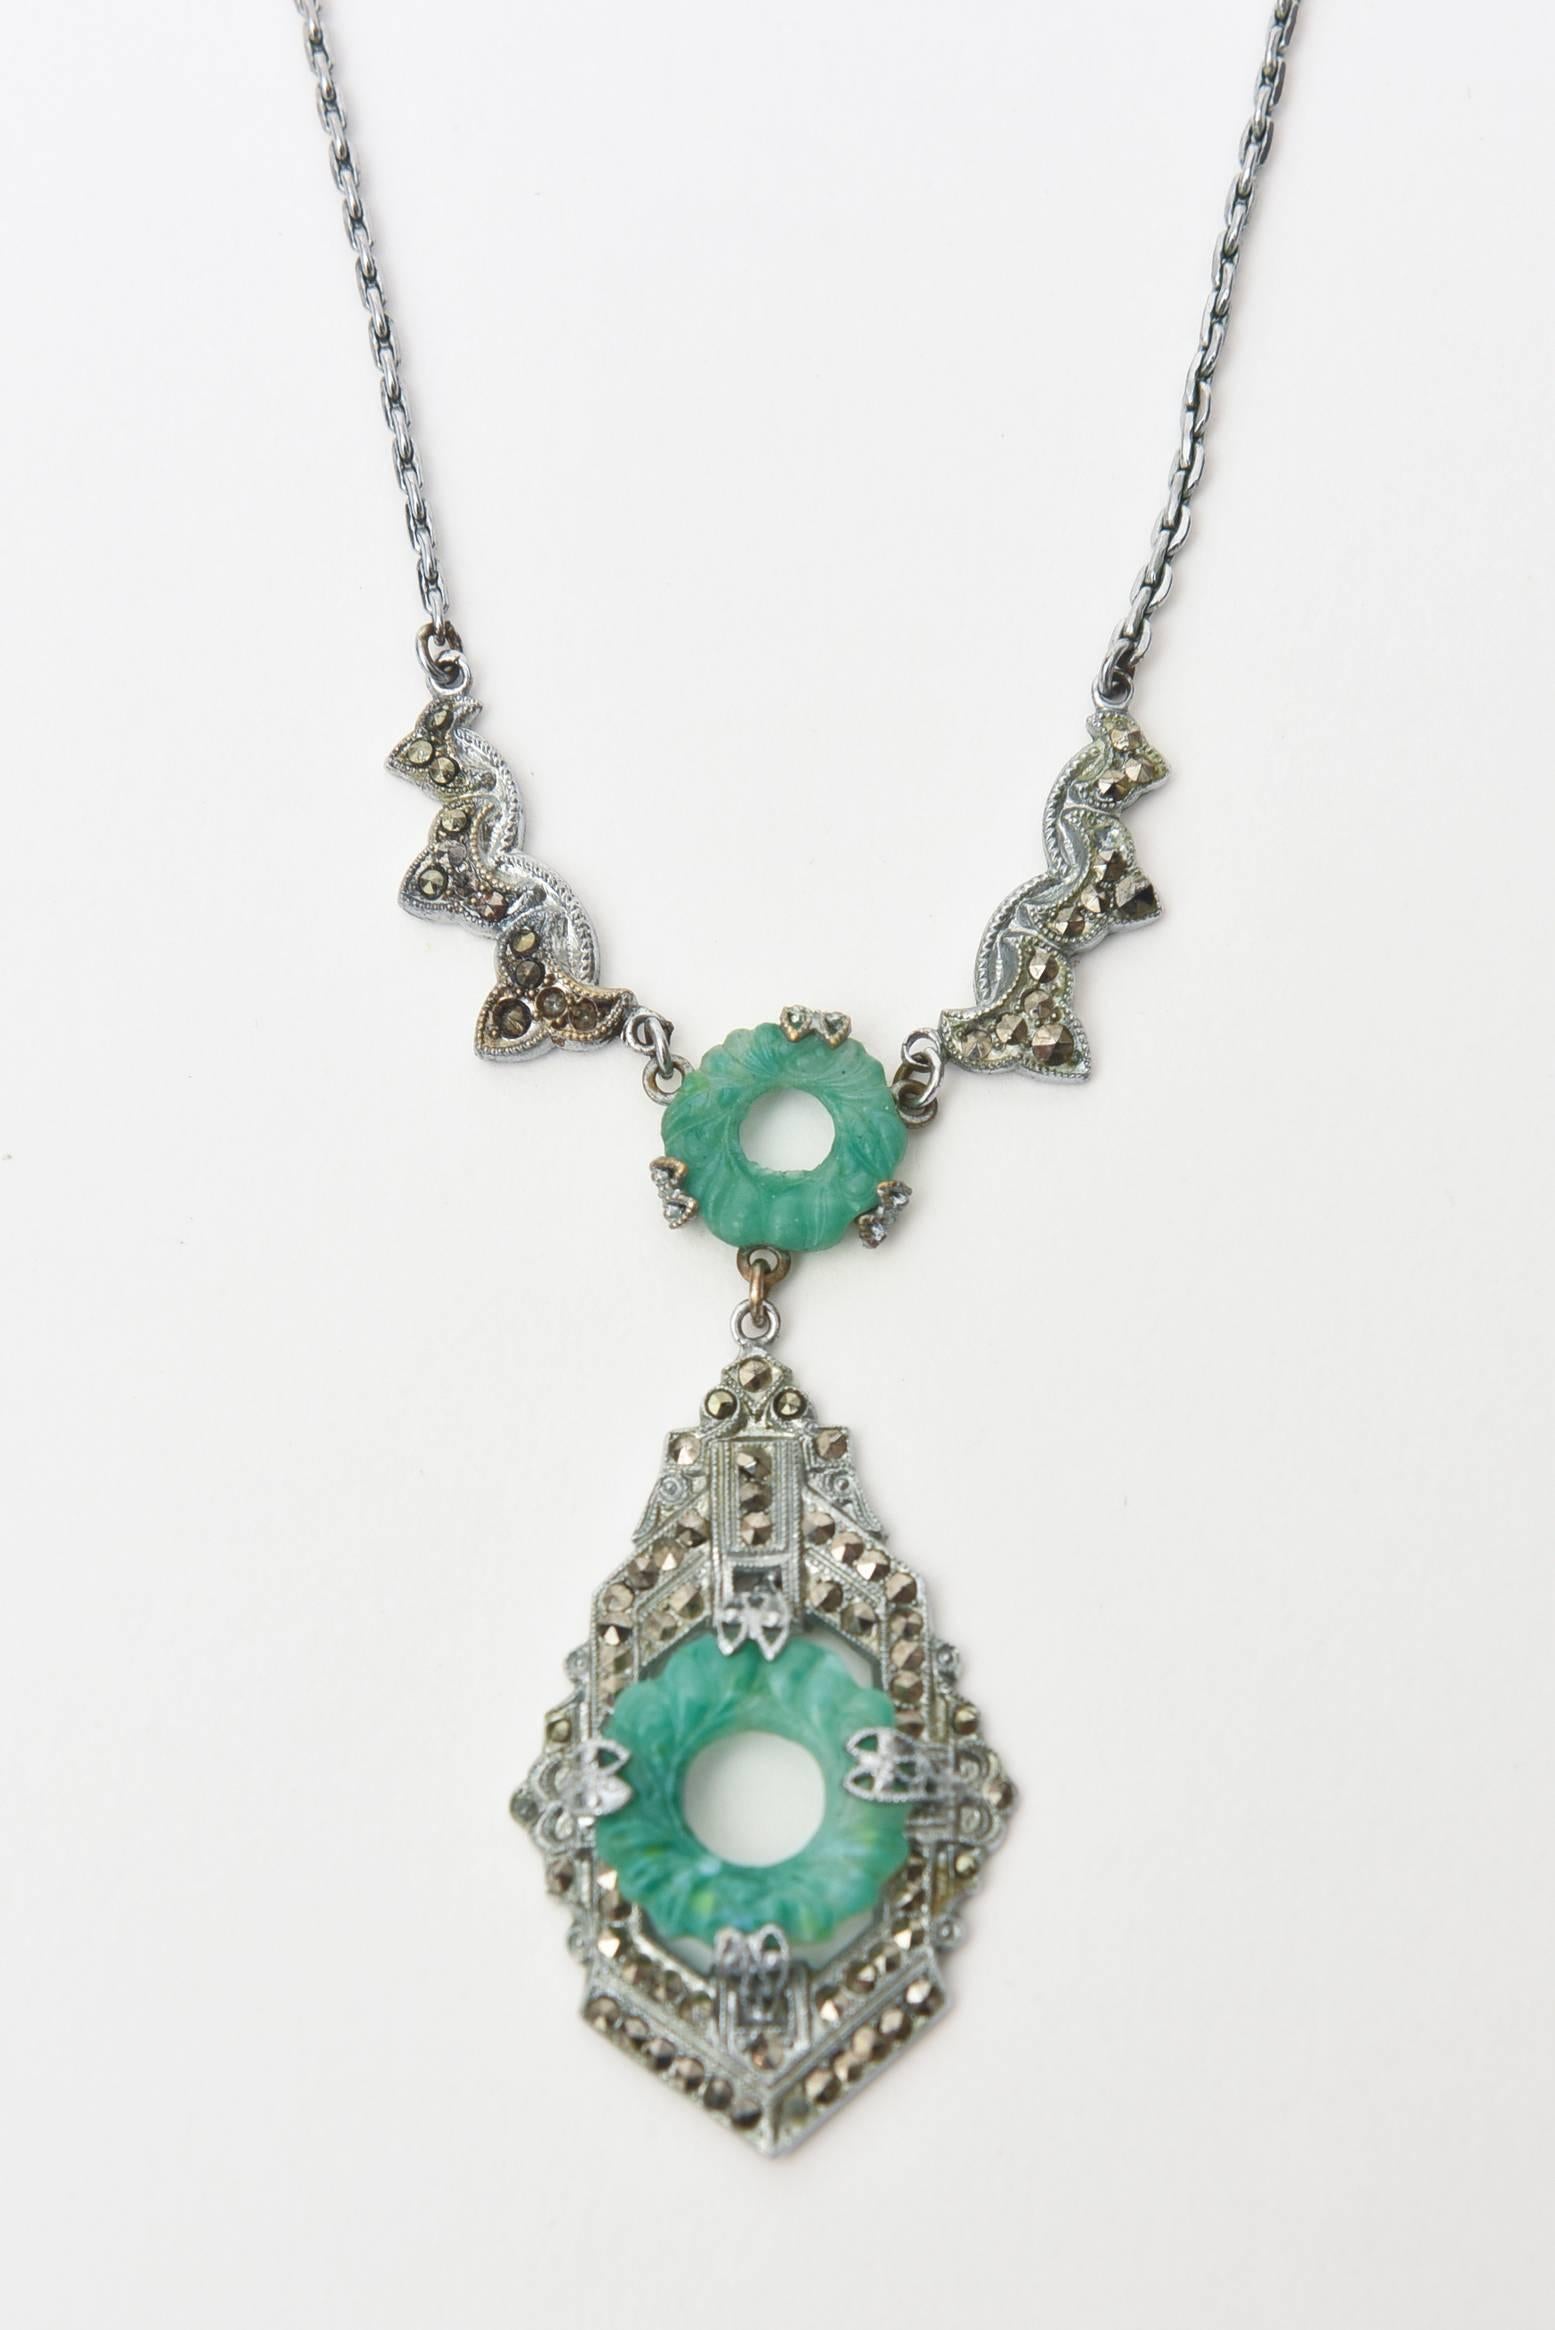 This lovely art deco necklace is made from a costume silver metal and has stone jade like life savers disks set in between the metal and marcasite. It is gorgeous on the neck and has a refined elegance. This is a keeper. The color of jade meets